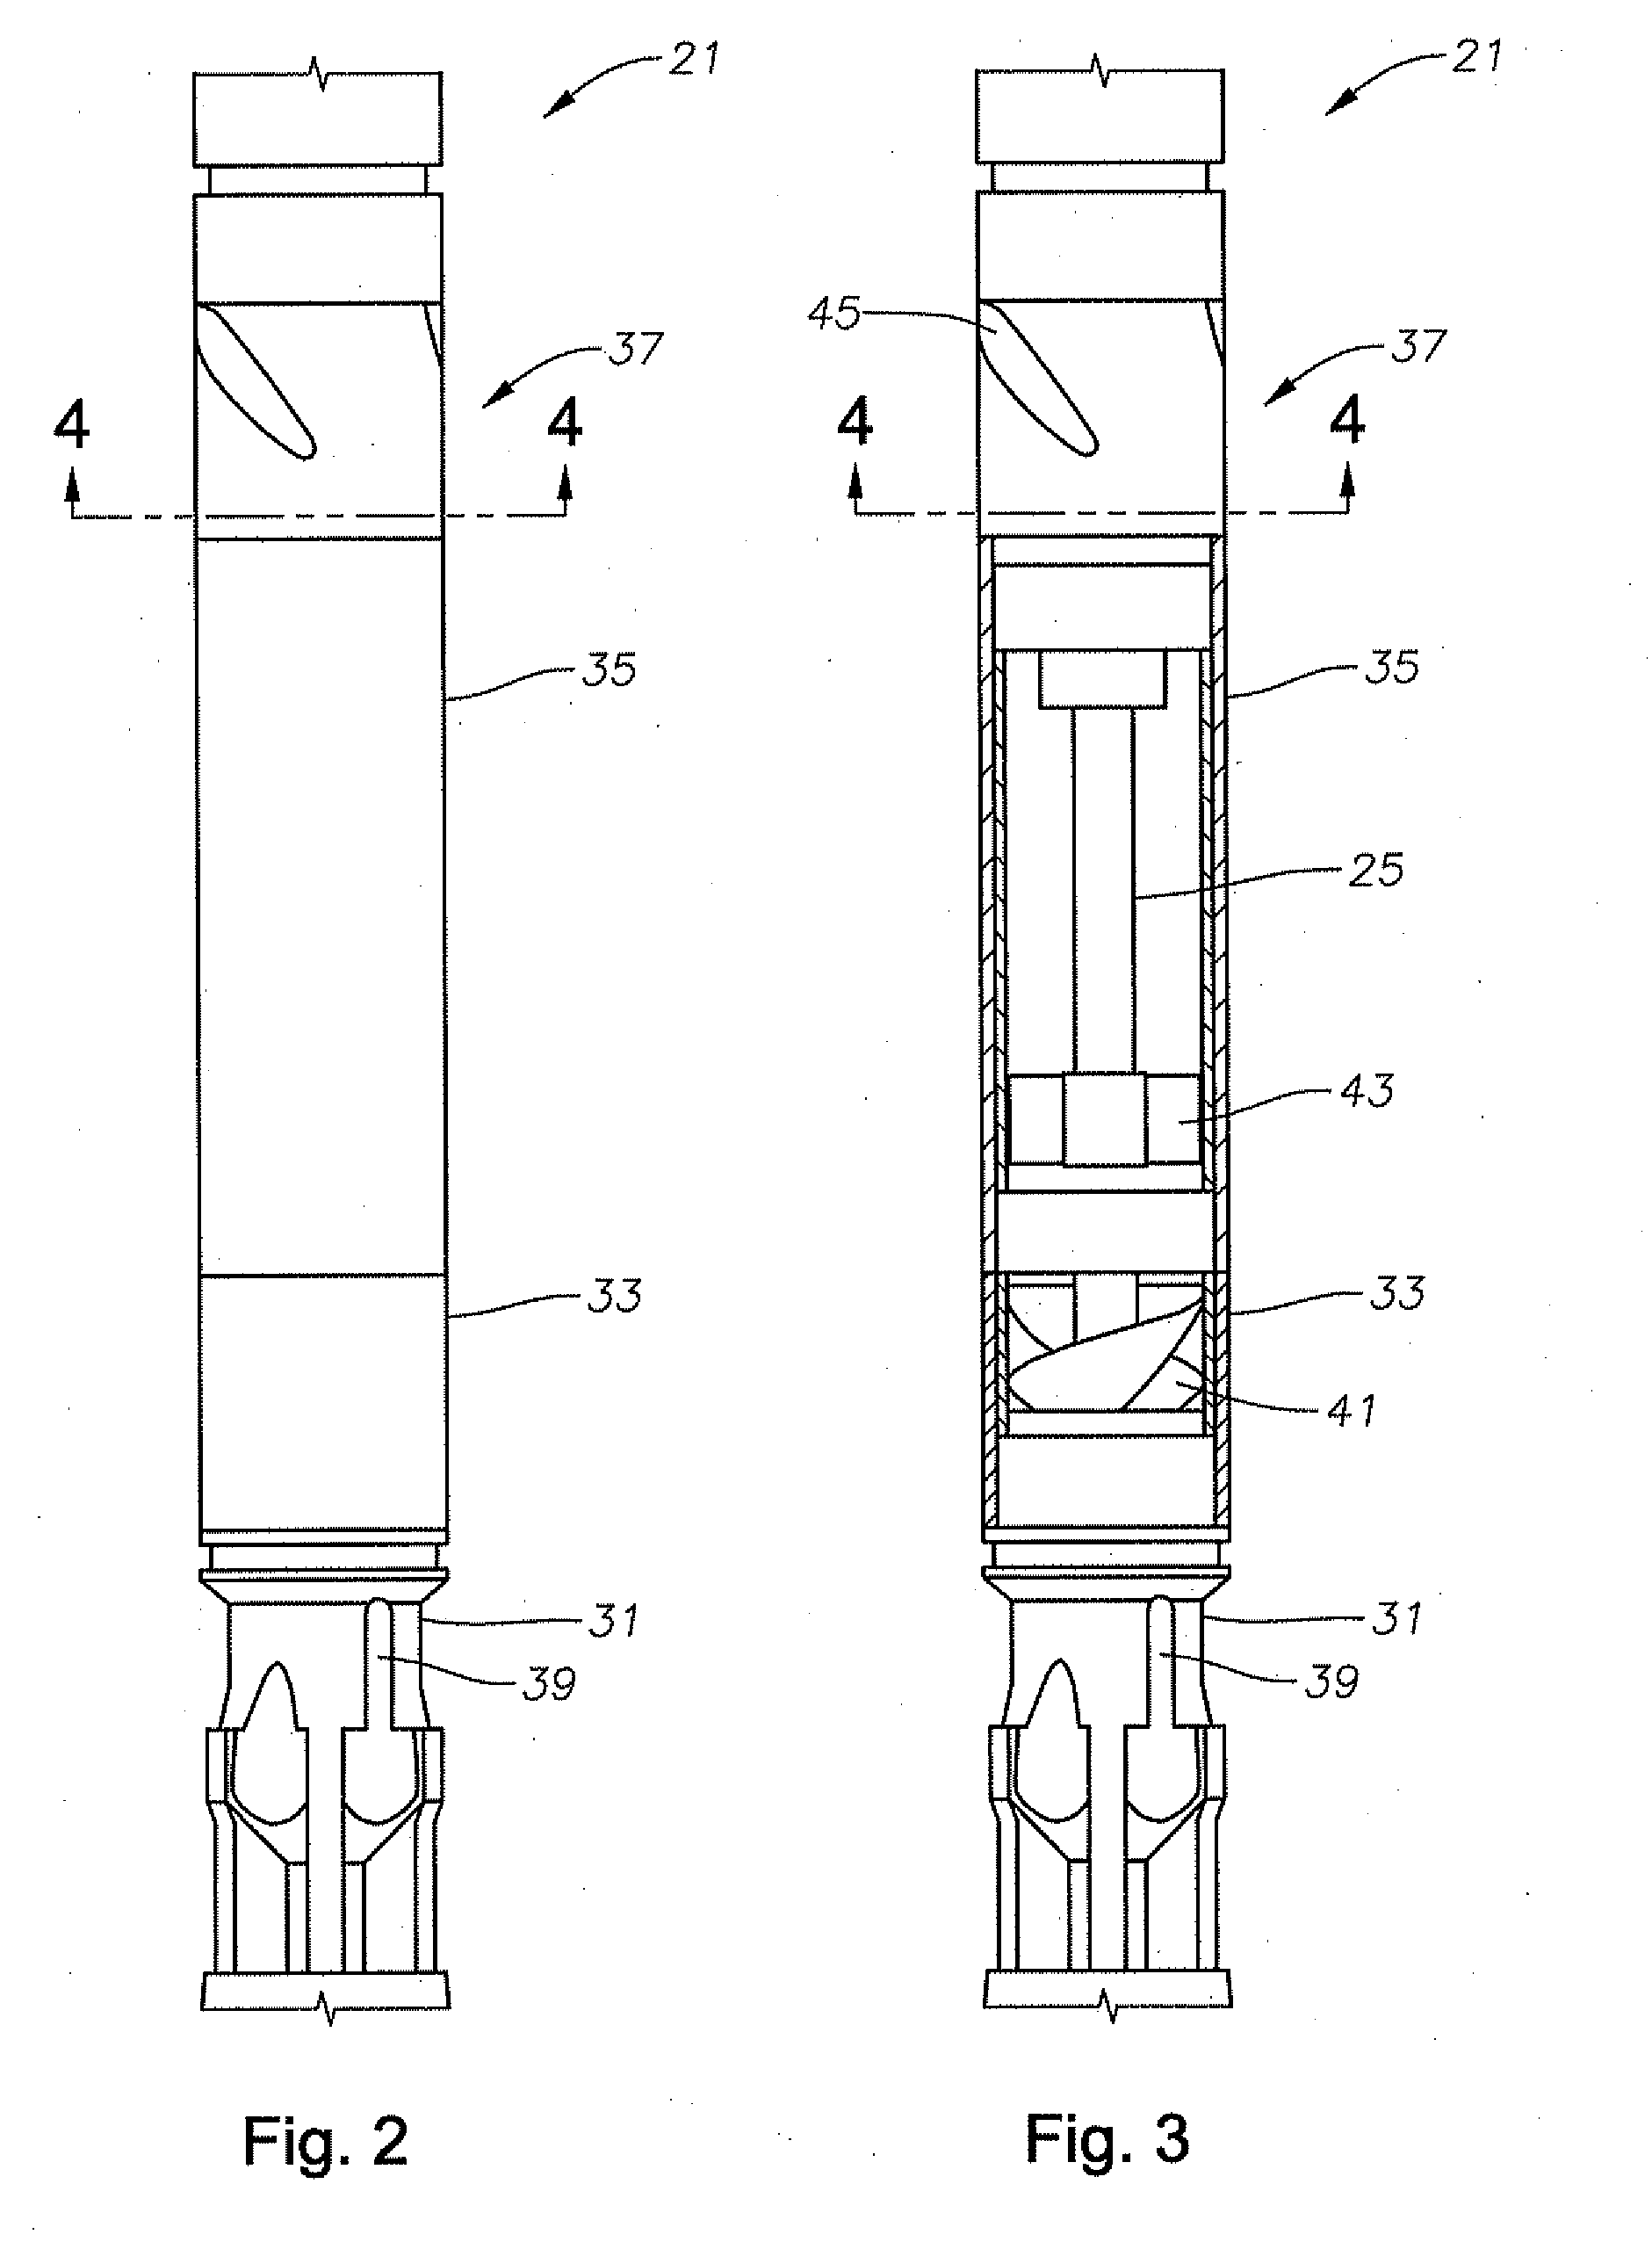 Gas separator with improved flow path efficiency